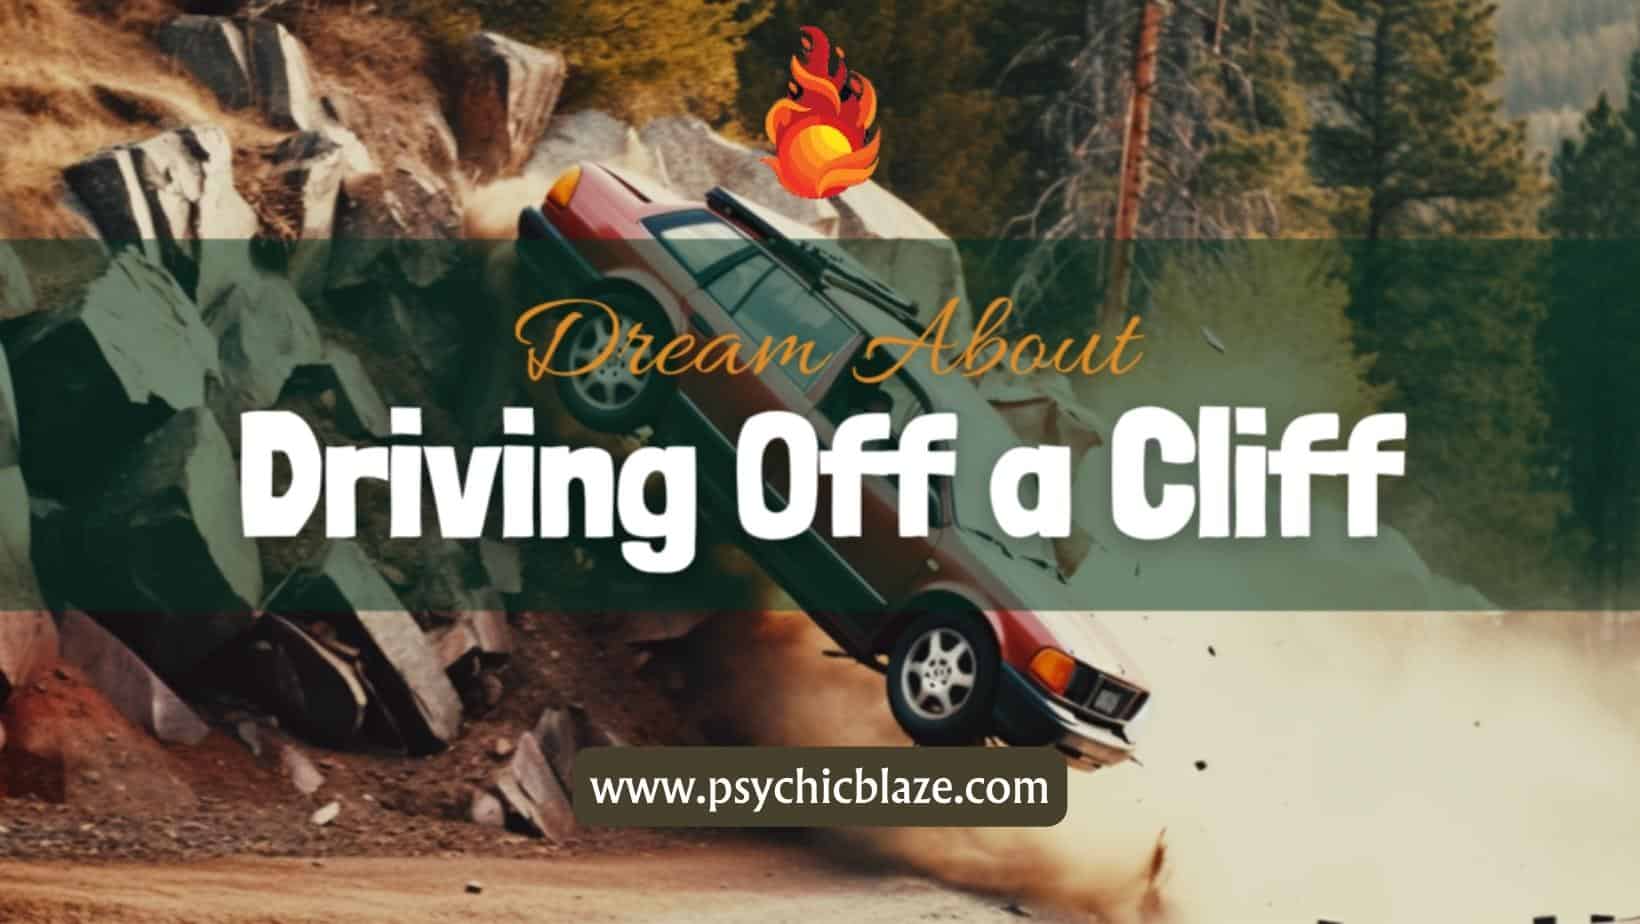 Dream about Driving Off a Cliff